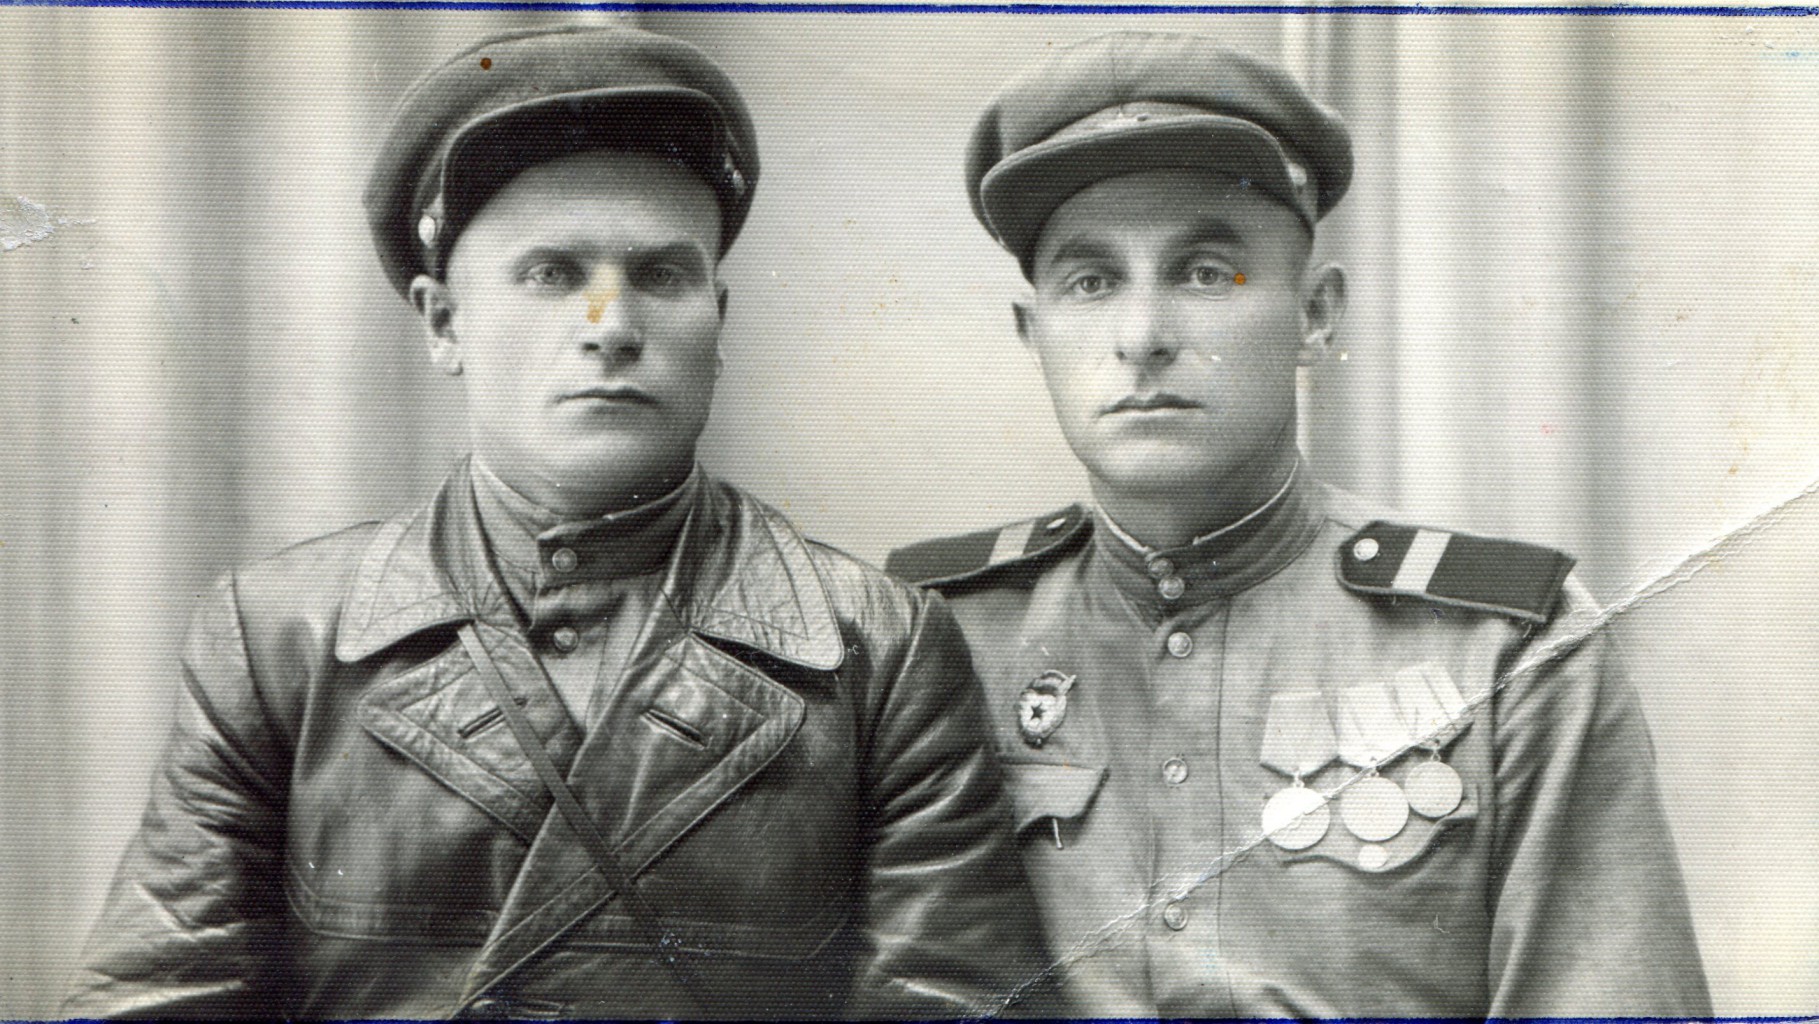 Israel (Igor) Bilousov (pictured right) in Czechoslovakia, 05.07.1945 (from the Museum “Jewish Memory and Holocaust in Ukraine” funds)